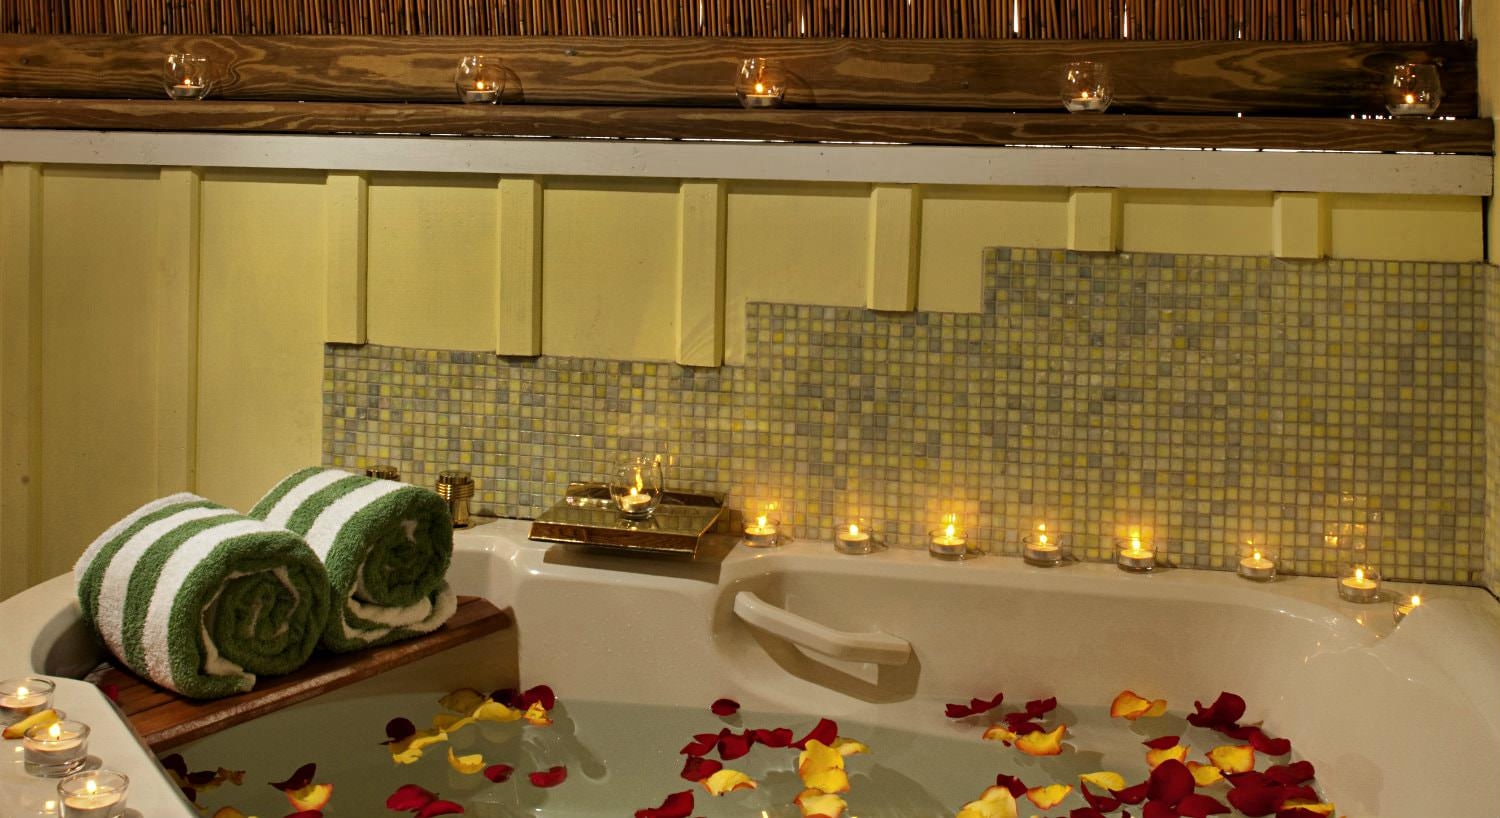 Large jacuzzi tub with red and yellow flower petals in water surrounded by small lit candles for mood lighting